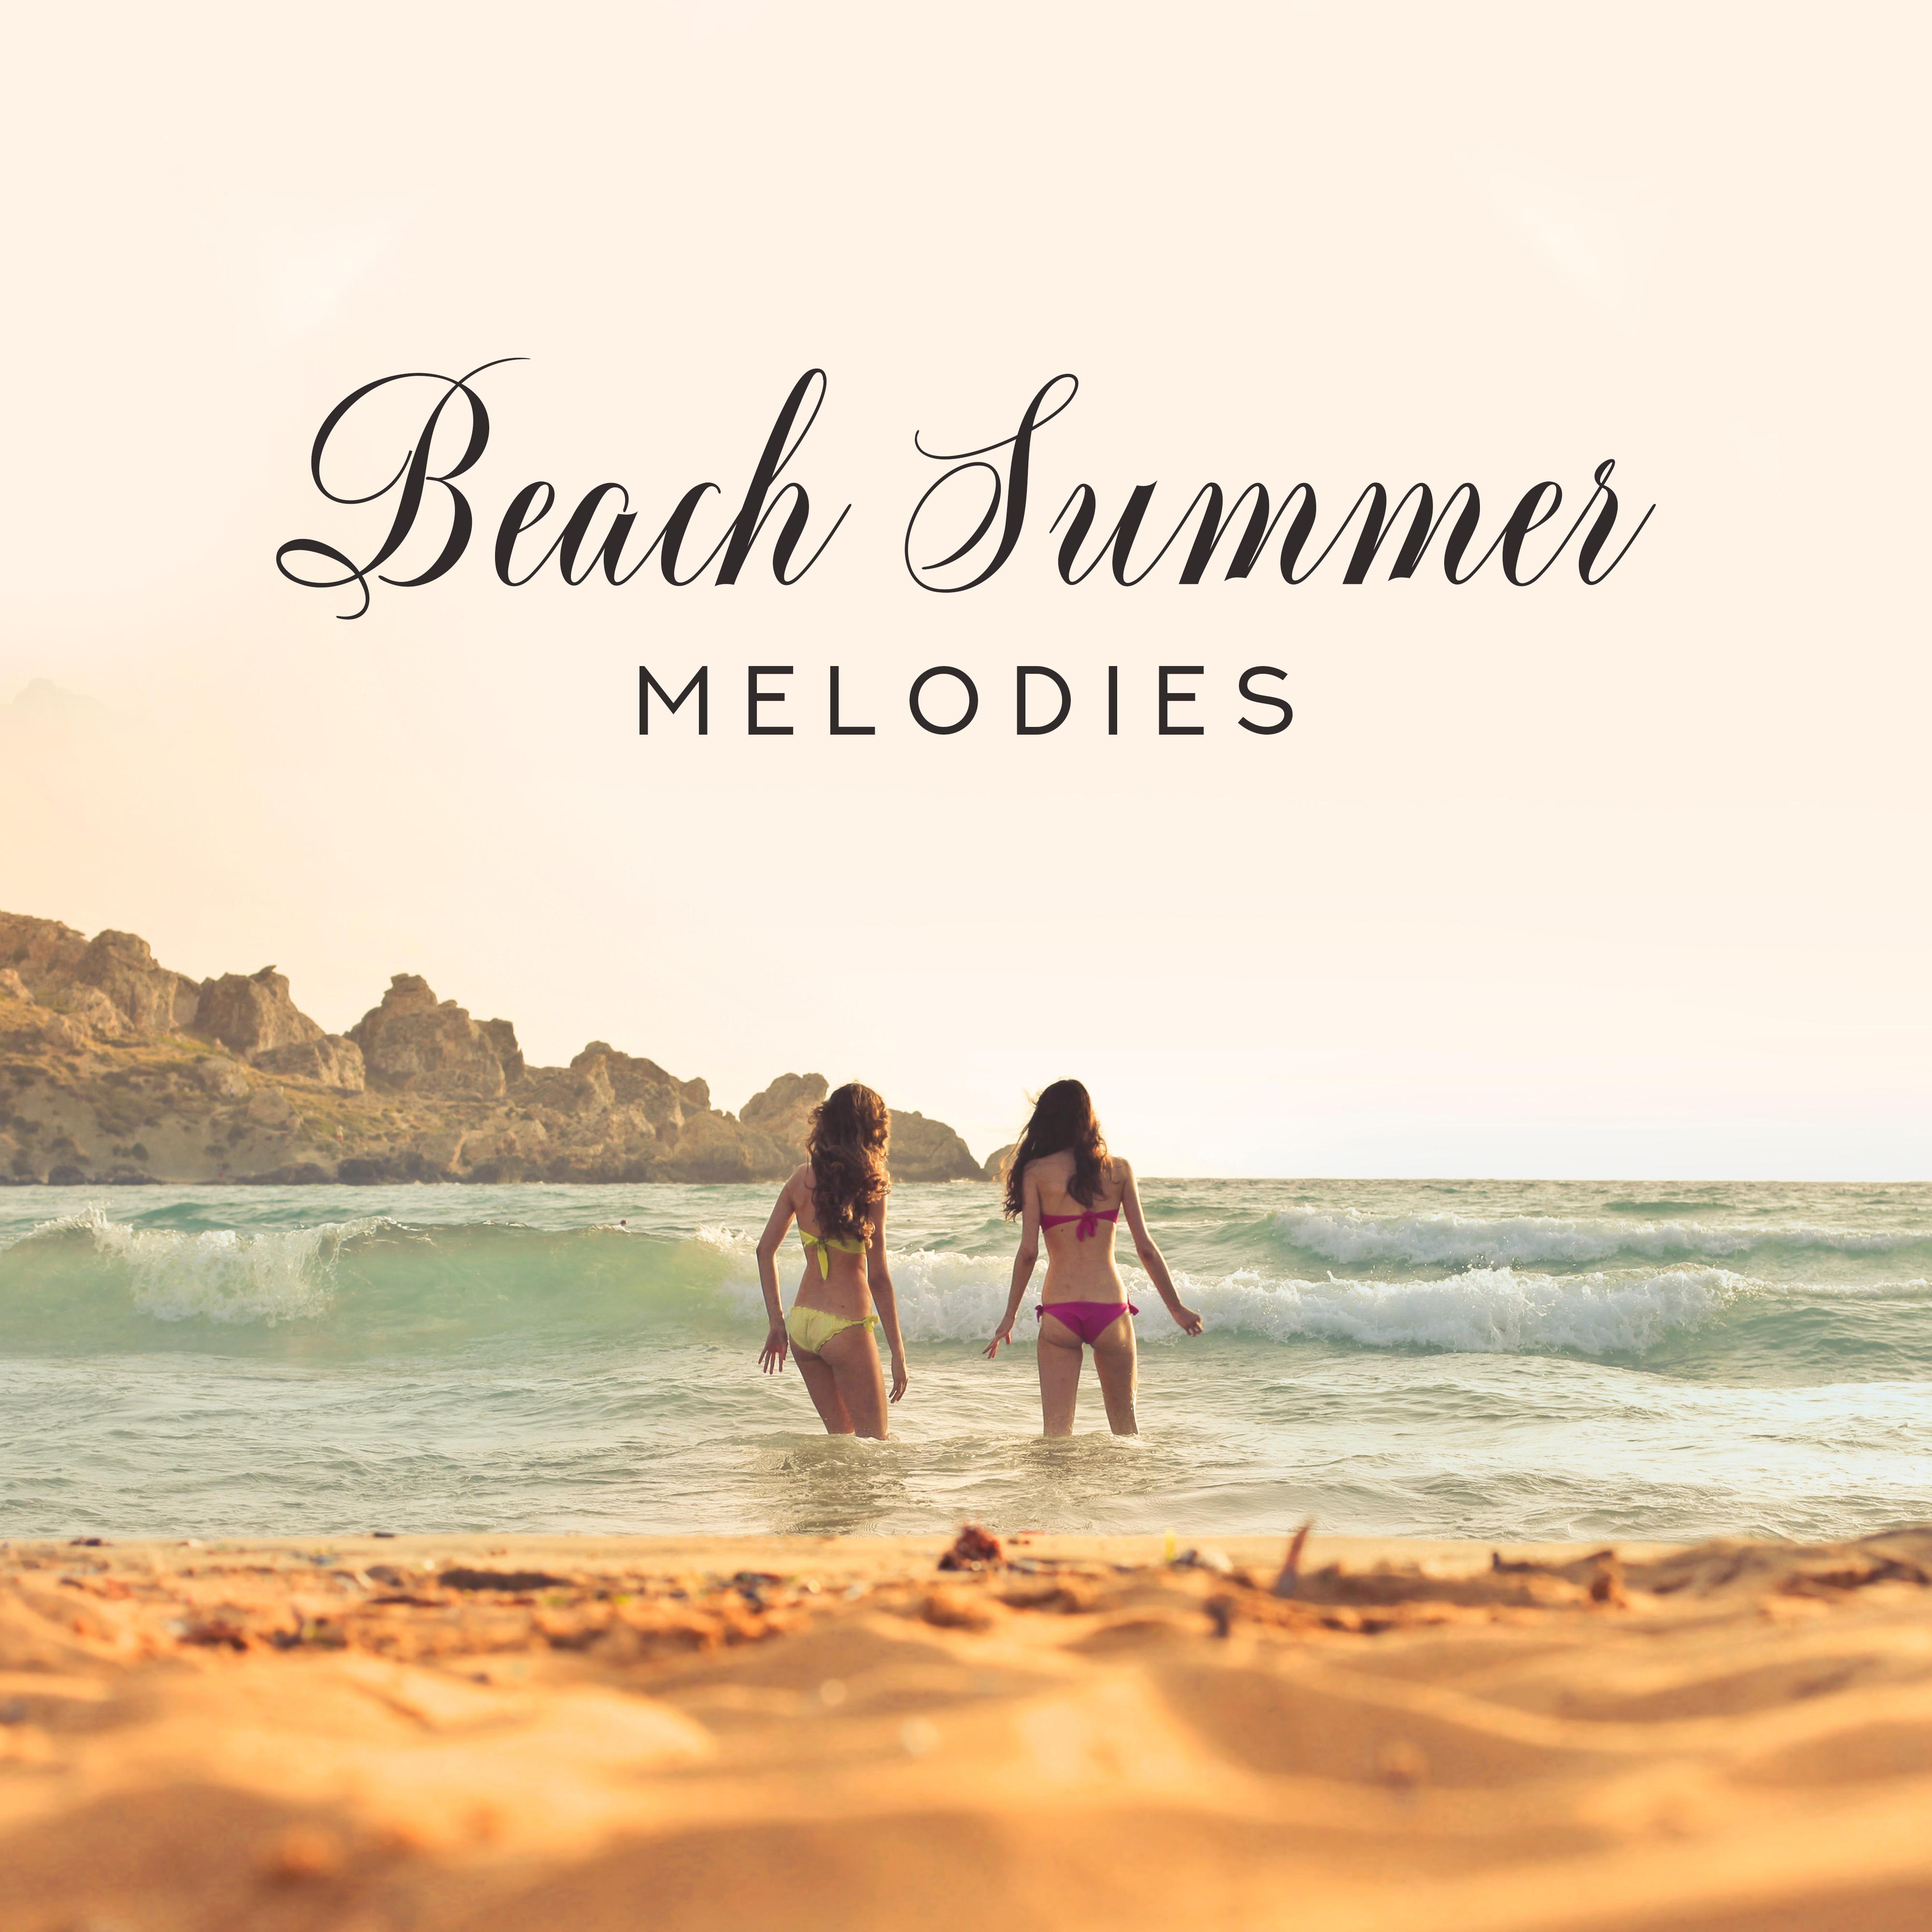 Beach Summer Melodies: Deep Relax, Rest, Bar Chillout, Chillout Under Palms, Ibiza Lounge, Summer Hits 2019